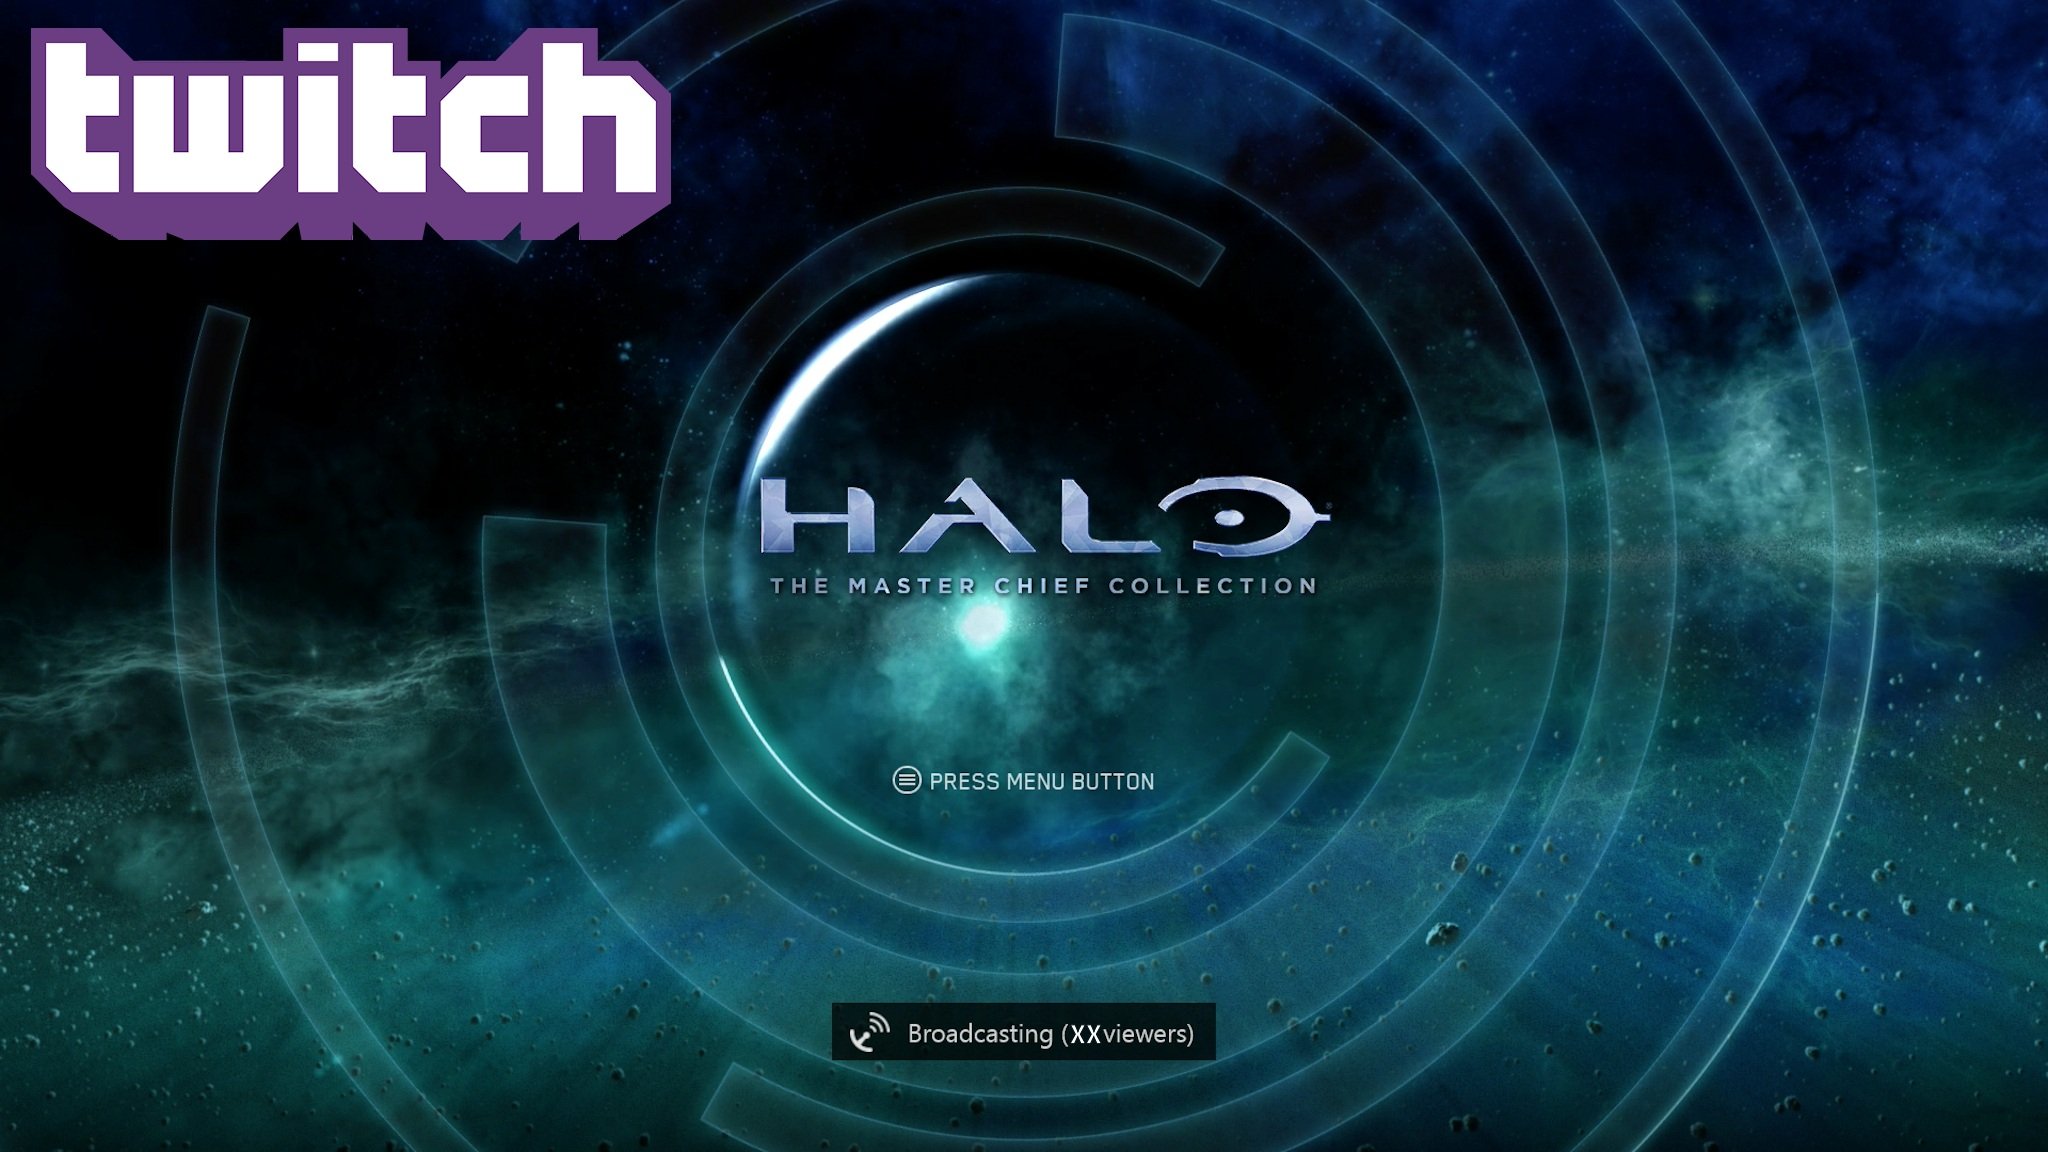 Halo_Master_Chief_Collection_title_Twitch.jpg